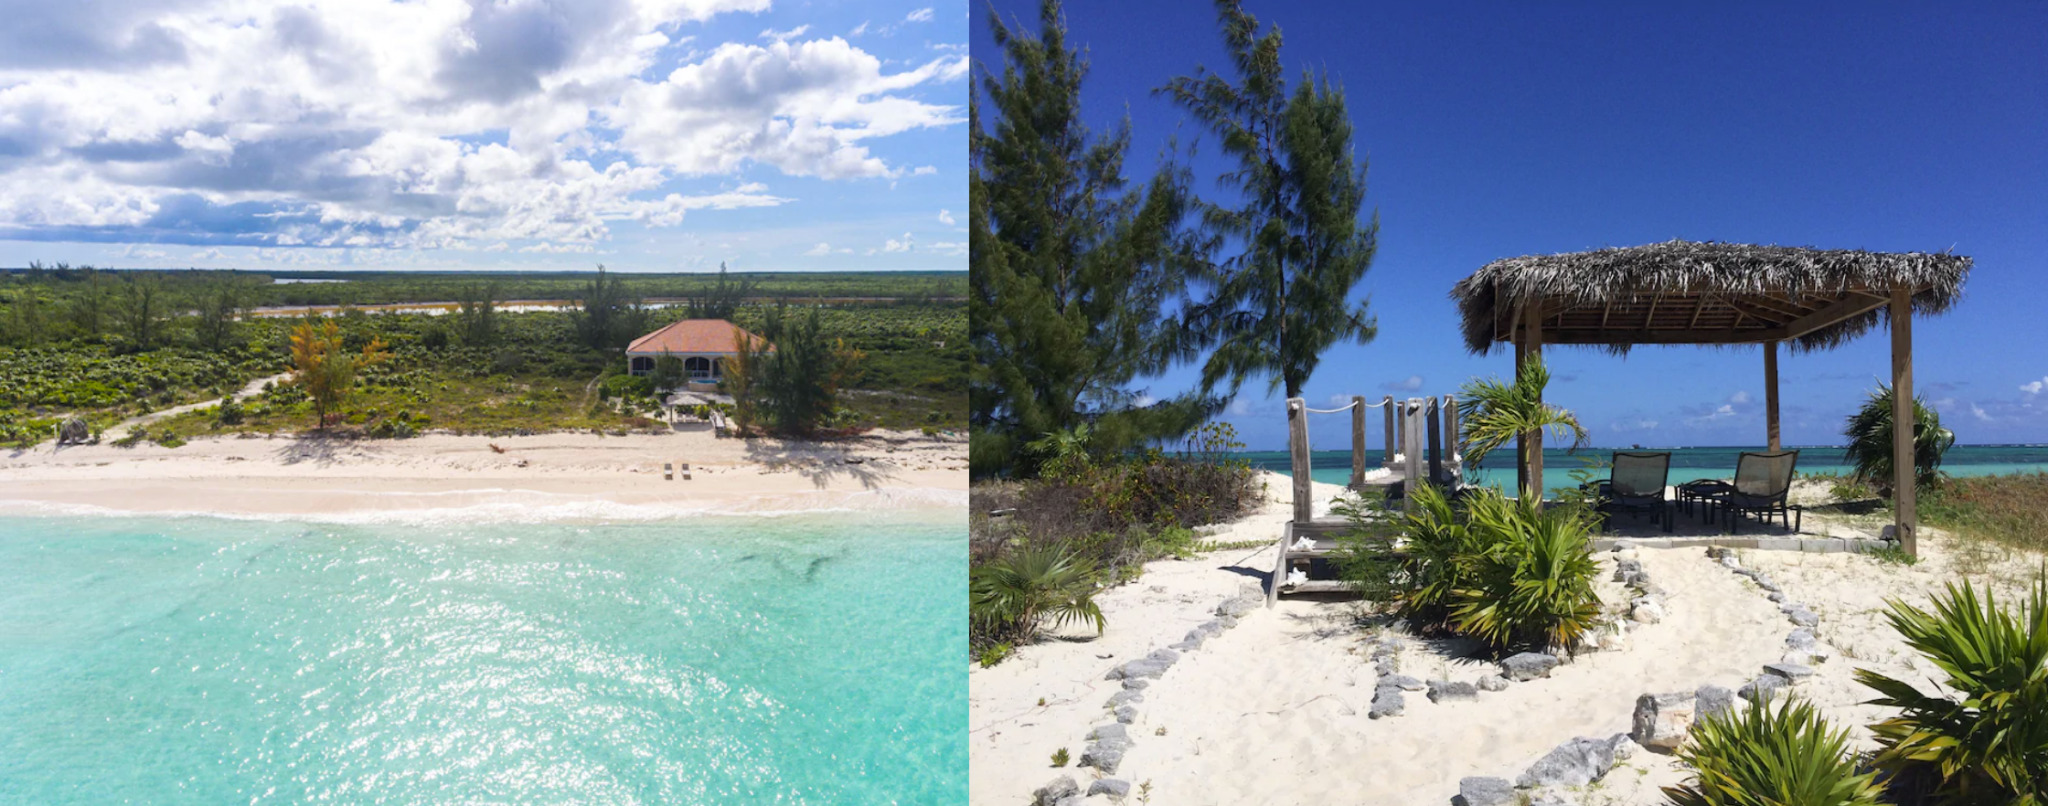 Side by side images of a private Turks and Caicos villa rental. The right side image is an aerial view of the villa from over the ocean, showing the secluded villa and outdoor spaces. The left-side image shows the private beach-front cabana overlooking the ocean.